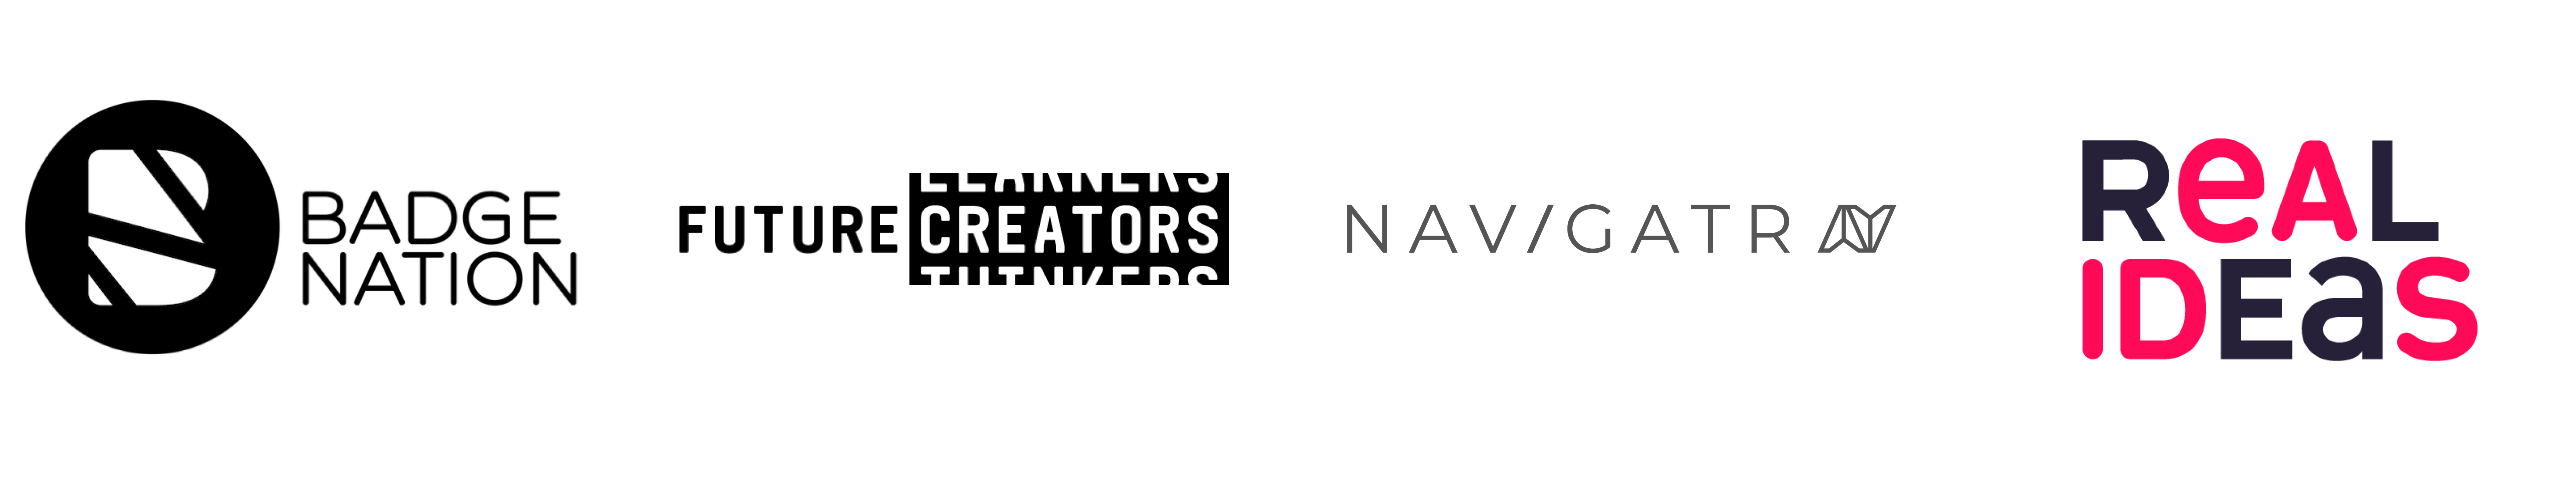 Cities of Learning partner image, showing Badge Nation, Navigatr, Future Creators and Real Ideas logos